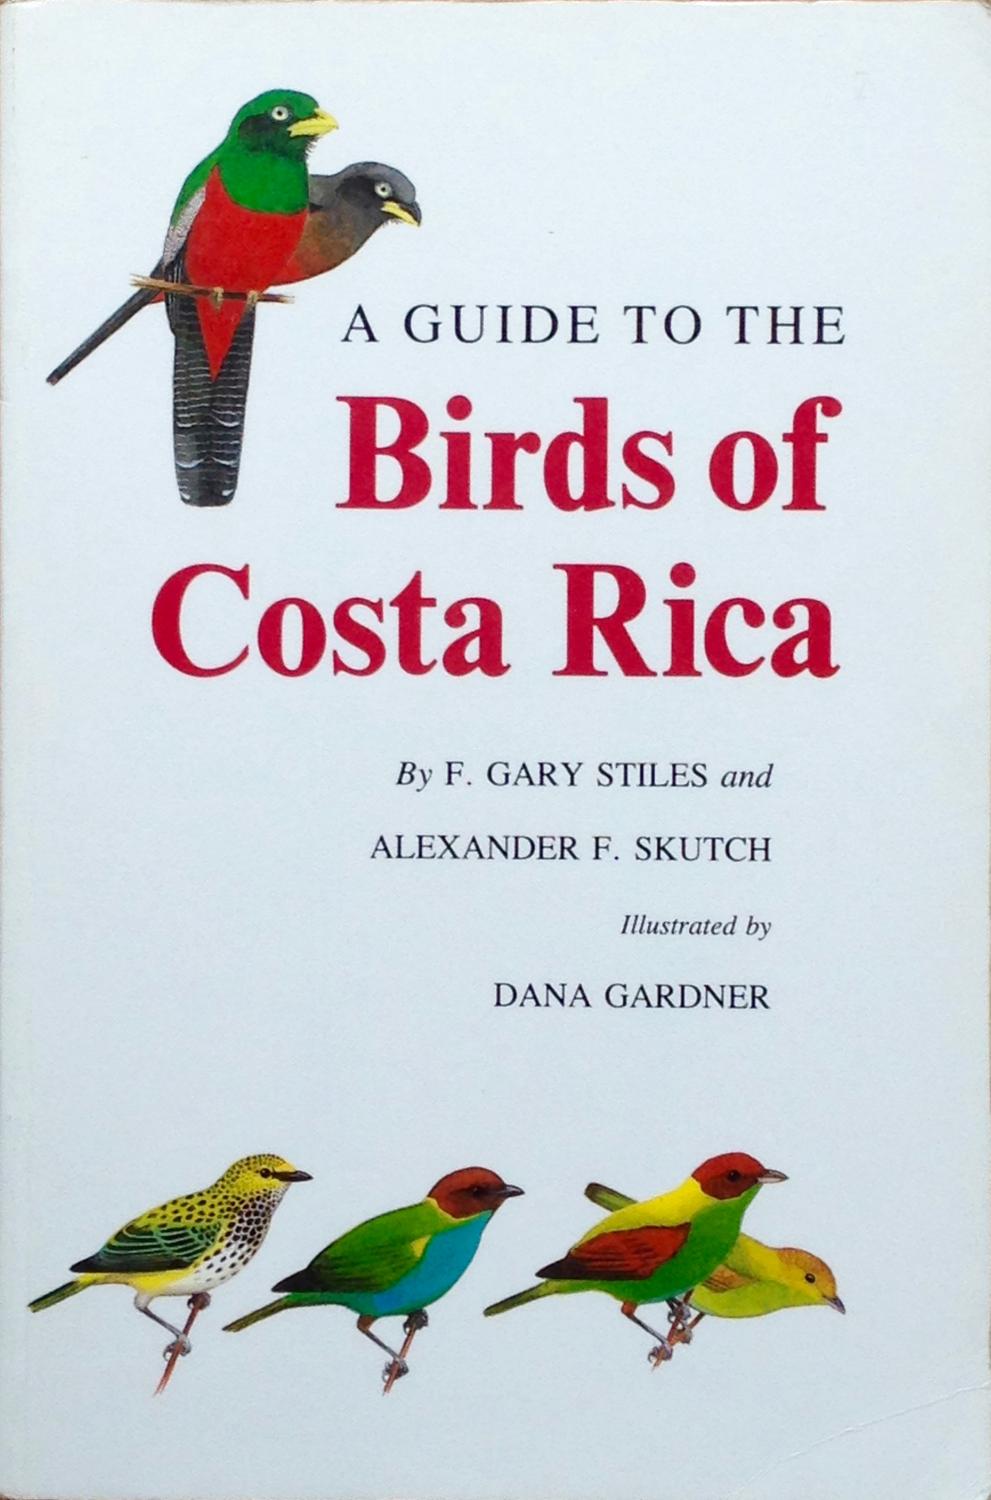 A Guide to the Birds of Costa Rica - Stiles, F.G. & Skutch, A.F.